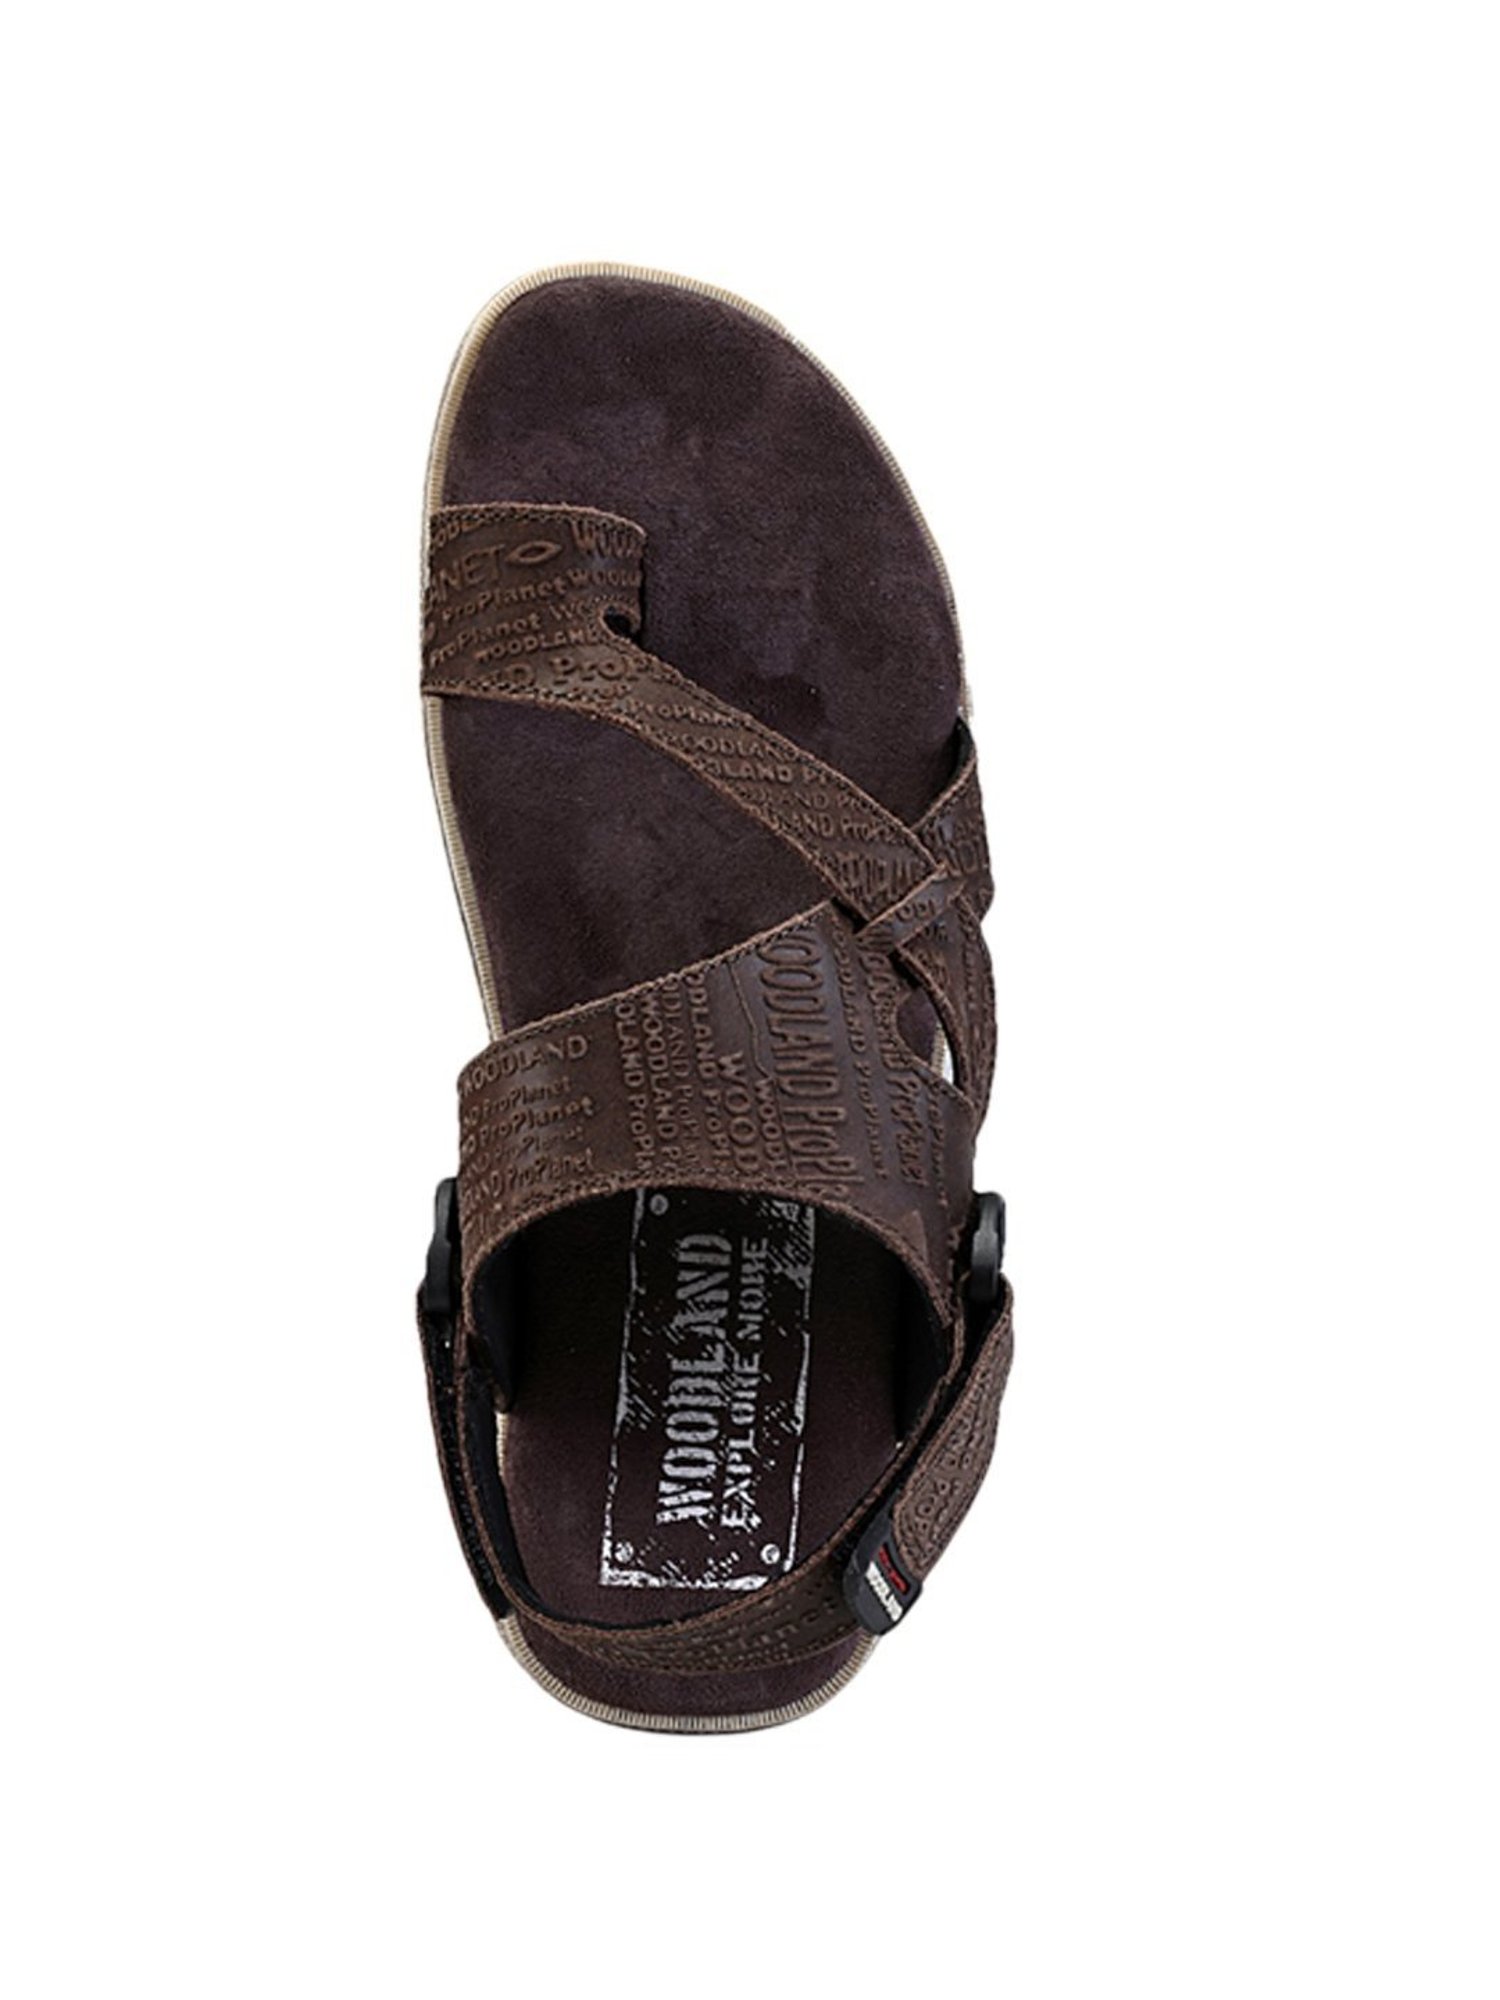 Attitudist Handcrafted Tan Strap Brown Casual Sandal For Men at Rs 999.00 |  Daily Sandal, Men Casual Sandal, Women Casual Sandal, Casual Sandal &  Floater, कैजुअल सैंडल - Marketing King Online Private